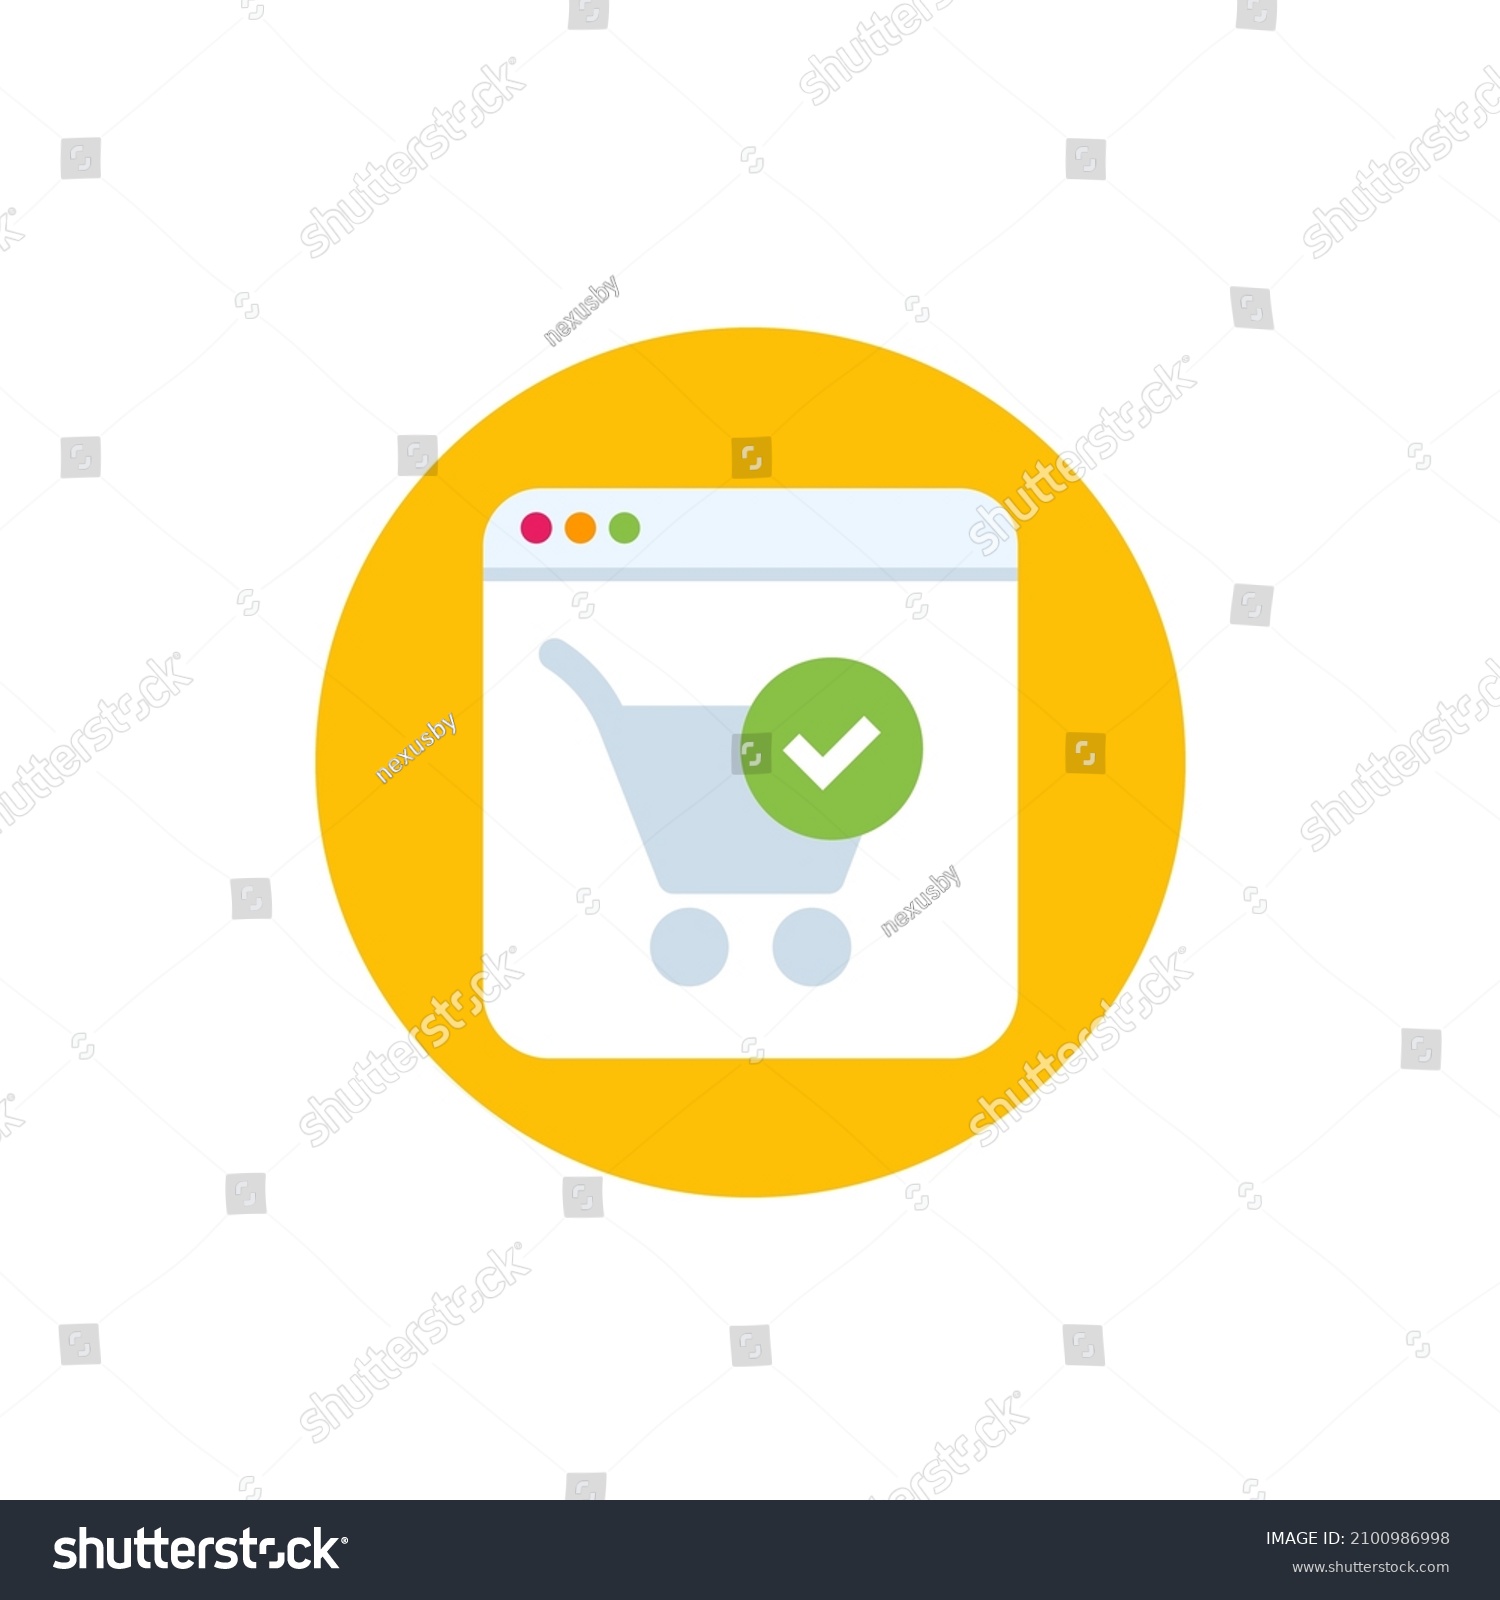 SVG of completed order icon with shopping cart, vector svg